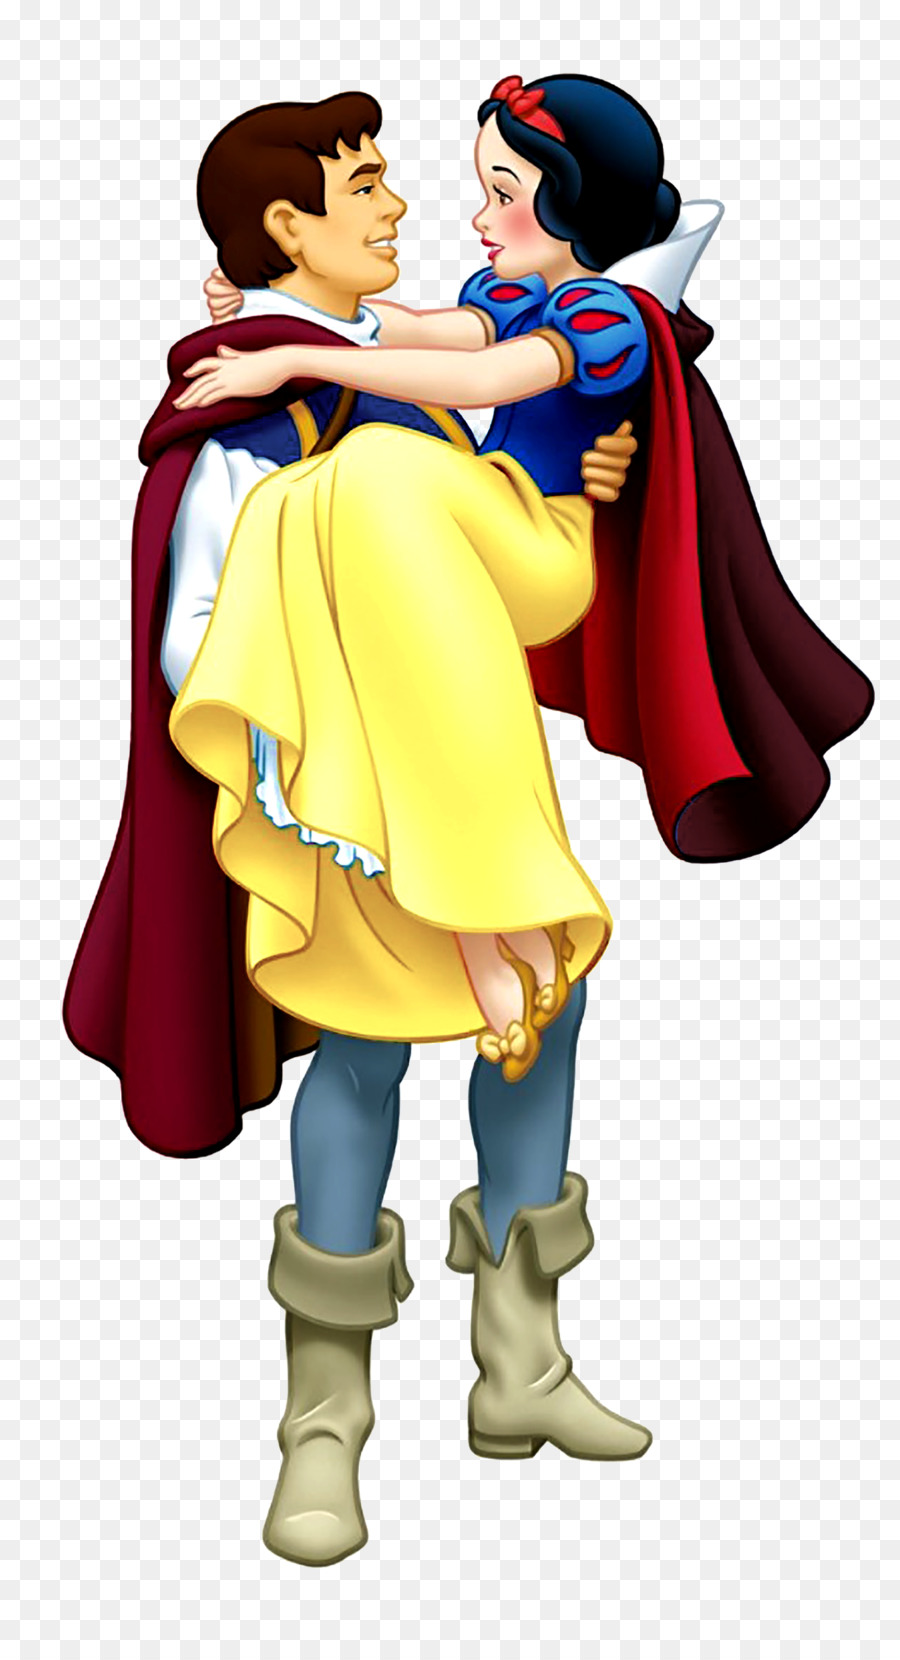 Prince Charming Snow White and the Seven Dwarfs Queen - Snow White png